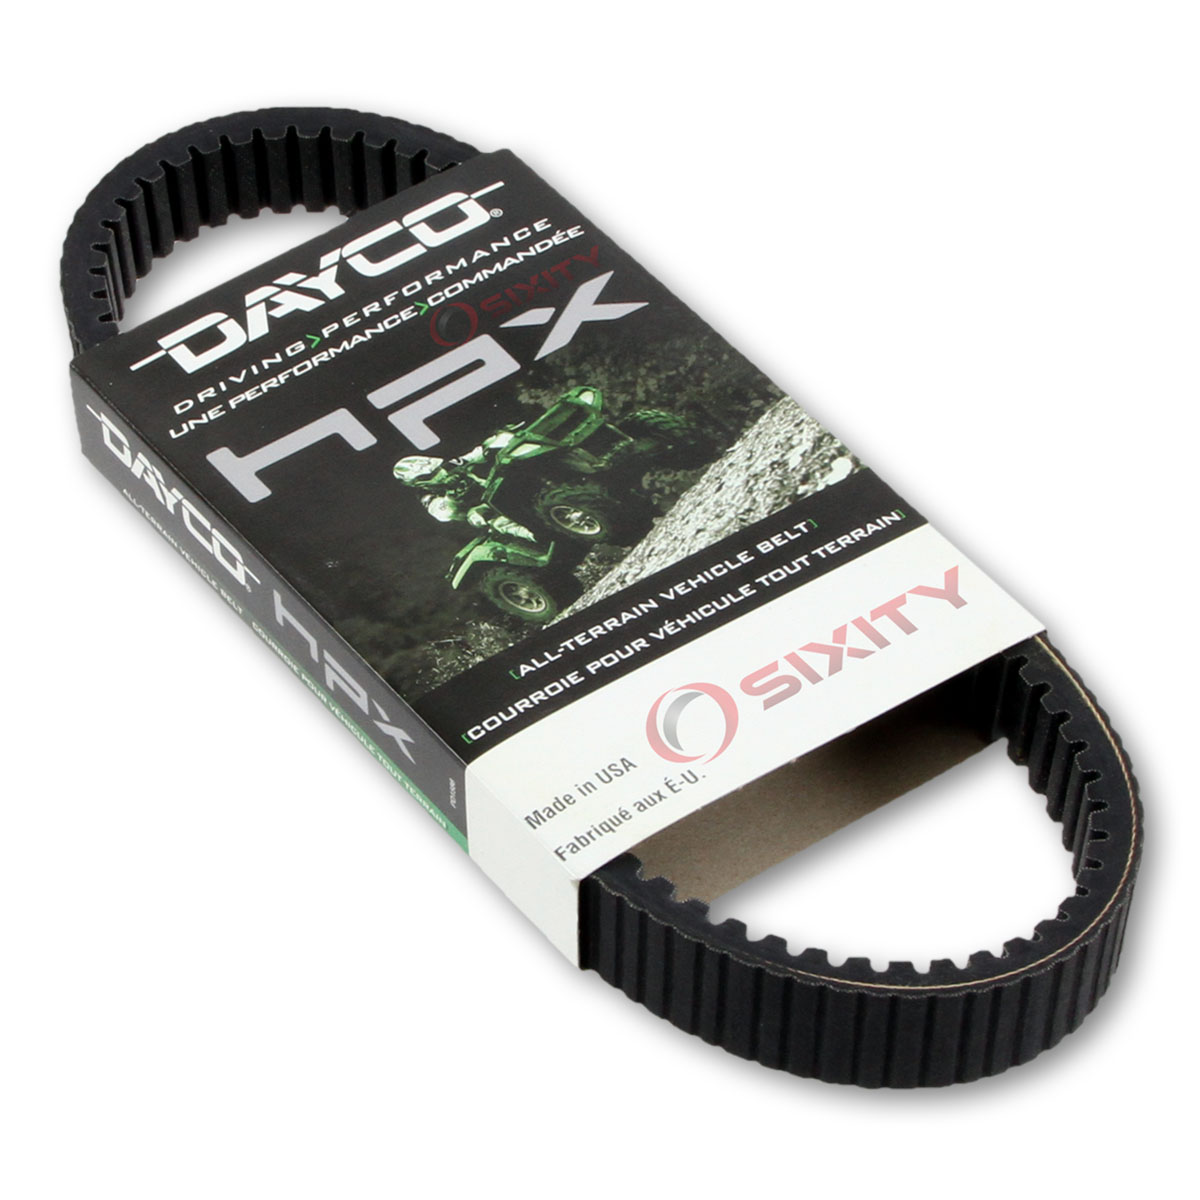 Dayco HPX Drive Belt for 2011 Arctic Cat 550 TRV GT - High Performance